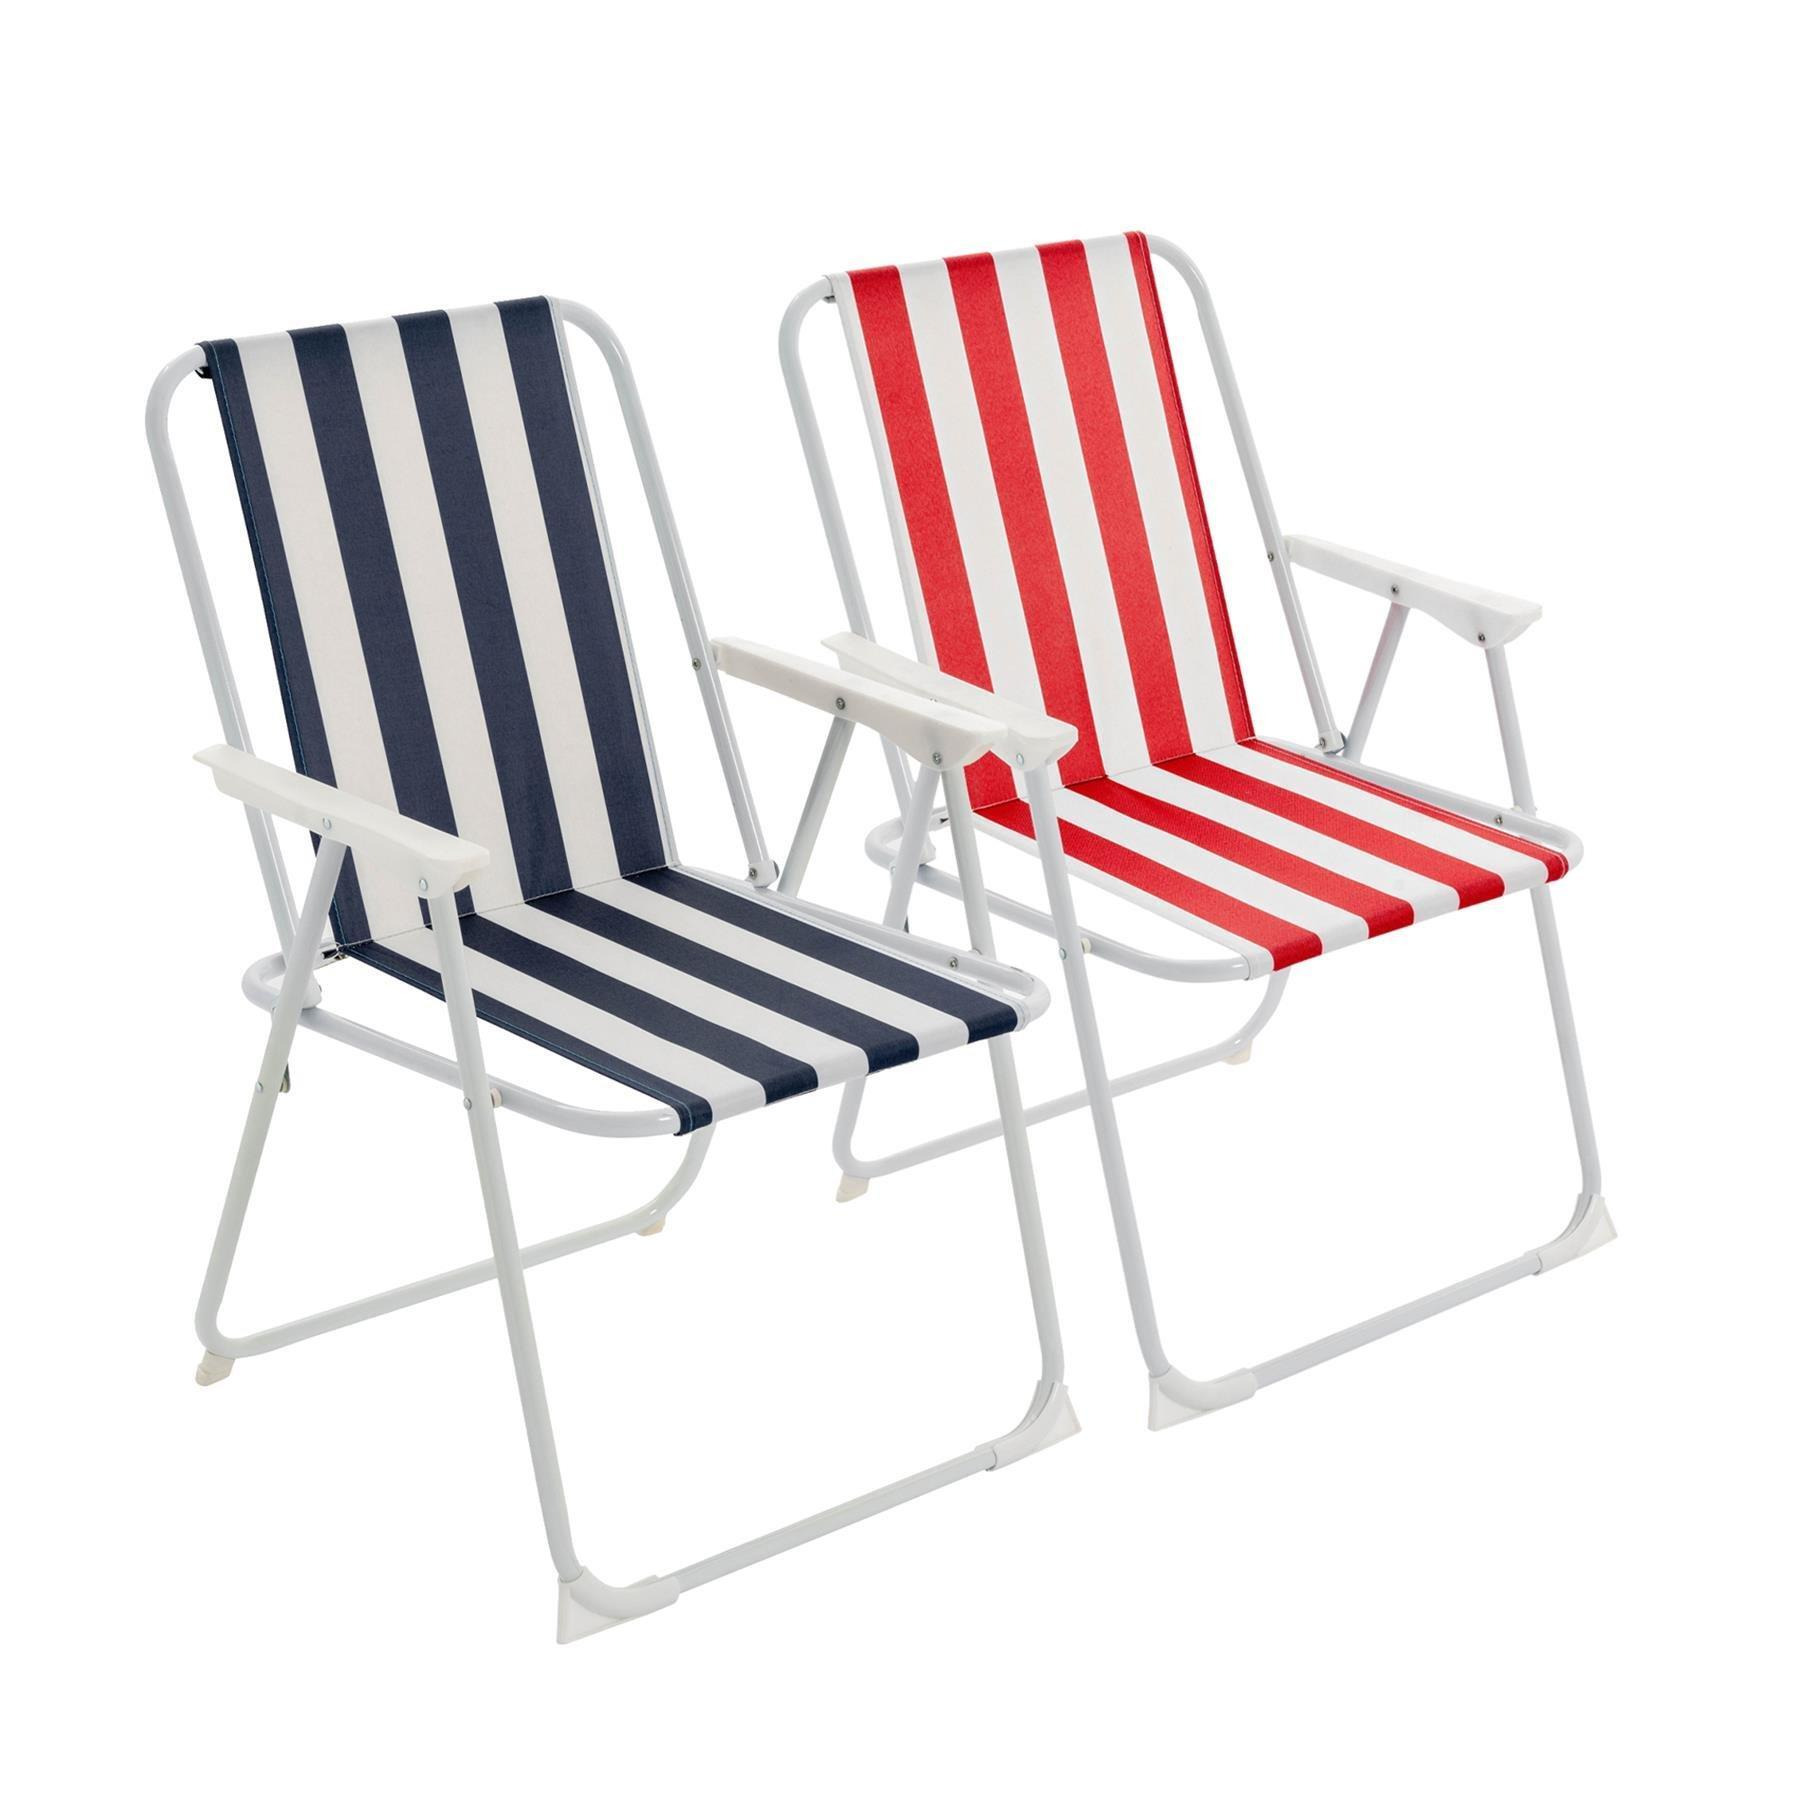 Folding Metal Beach Chairs Blue/Red Stripe Pack of 2 - image 1